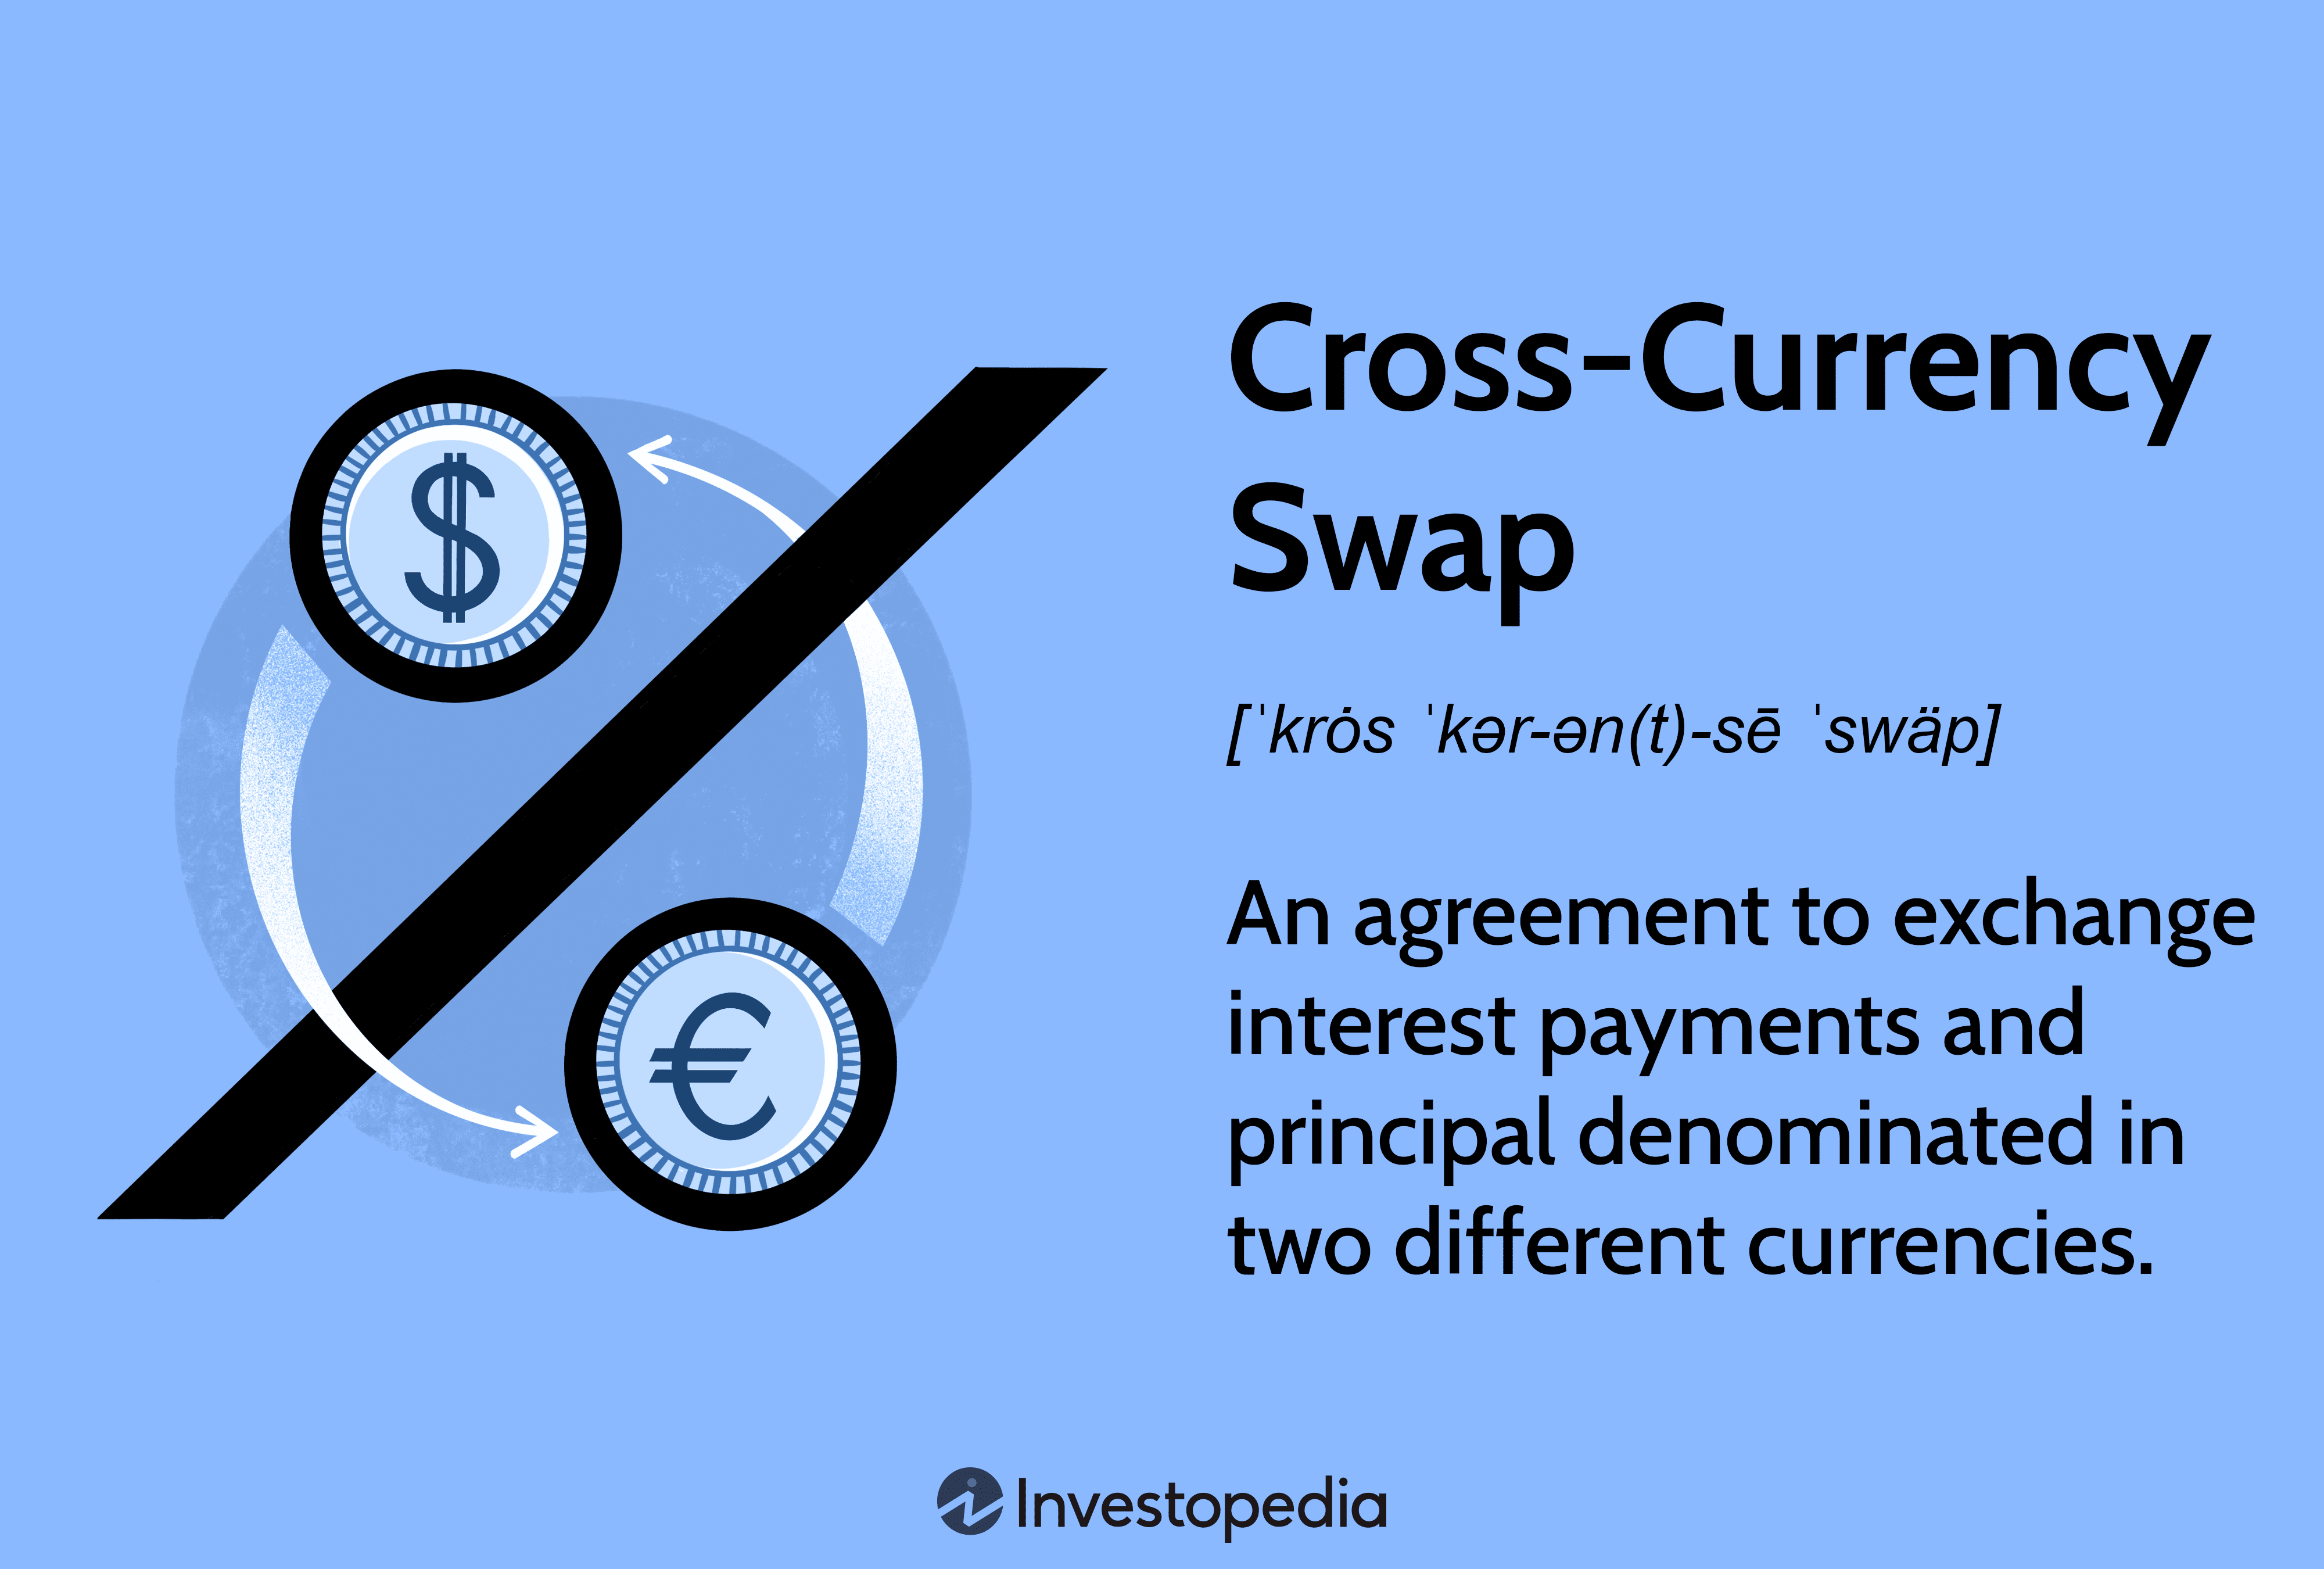 Cross-Currency Swap: An agreement to exchange interest payments and principal denominated in two different currencies. 